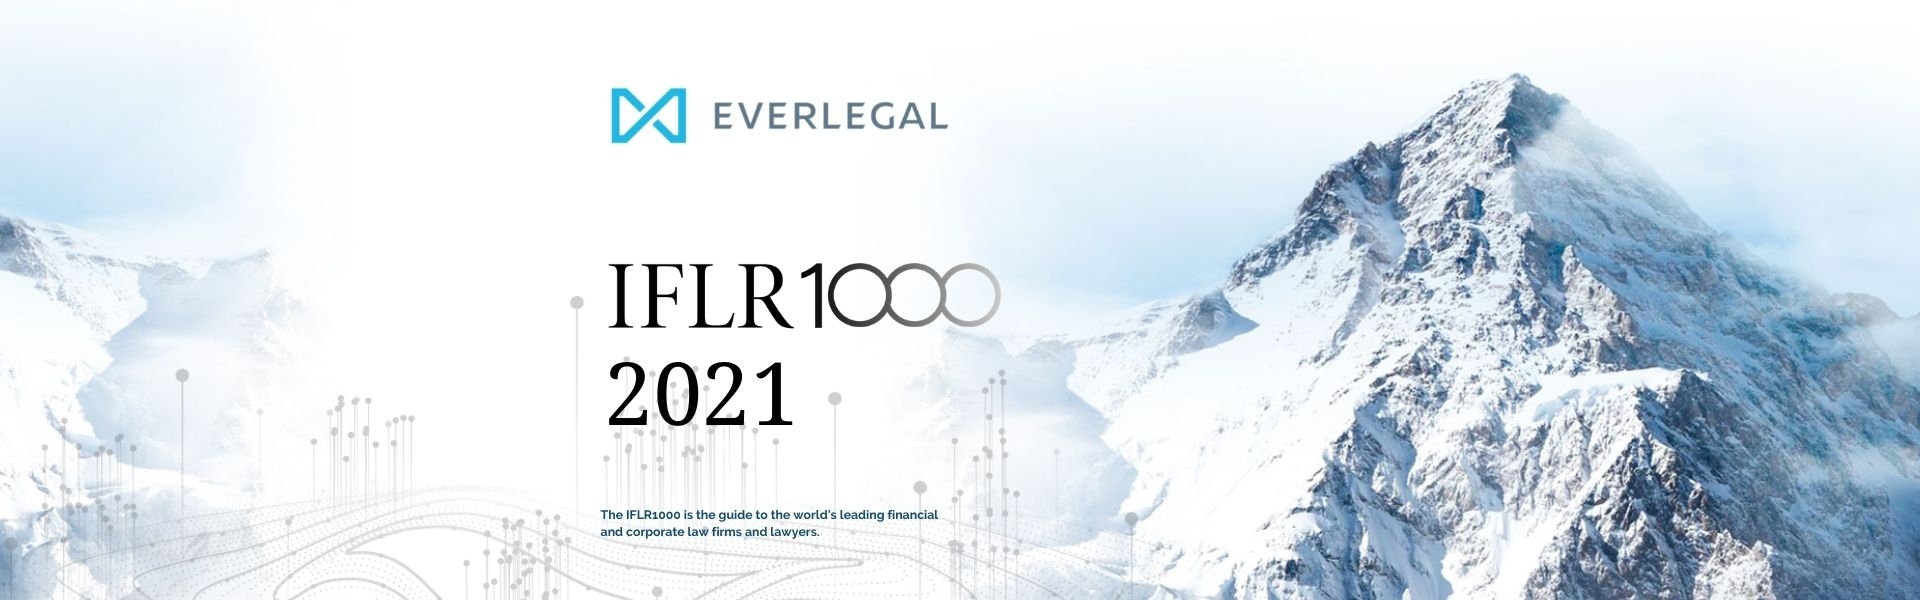 EVERLEGAL is among market leaders in Banking and Finance practice